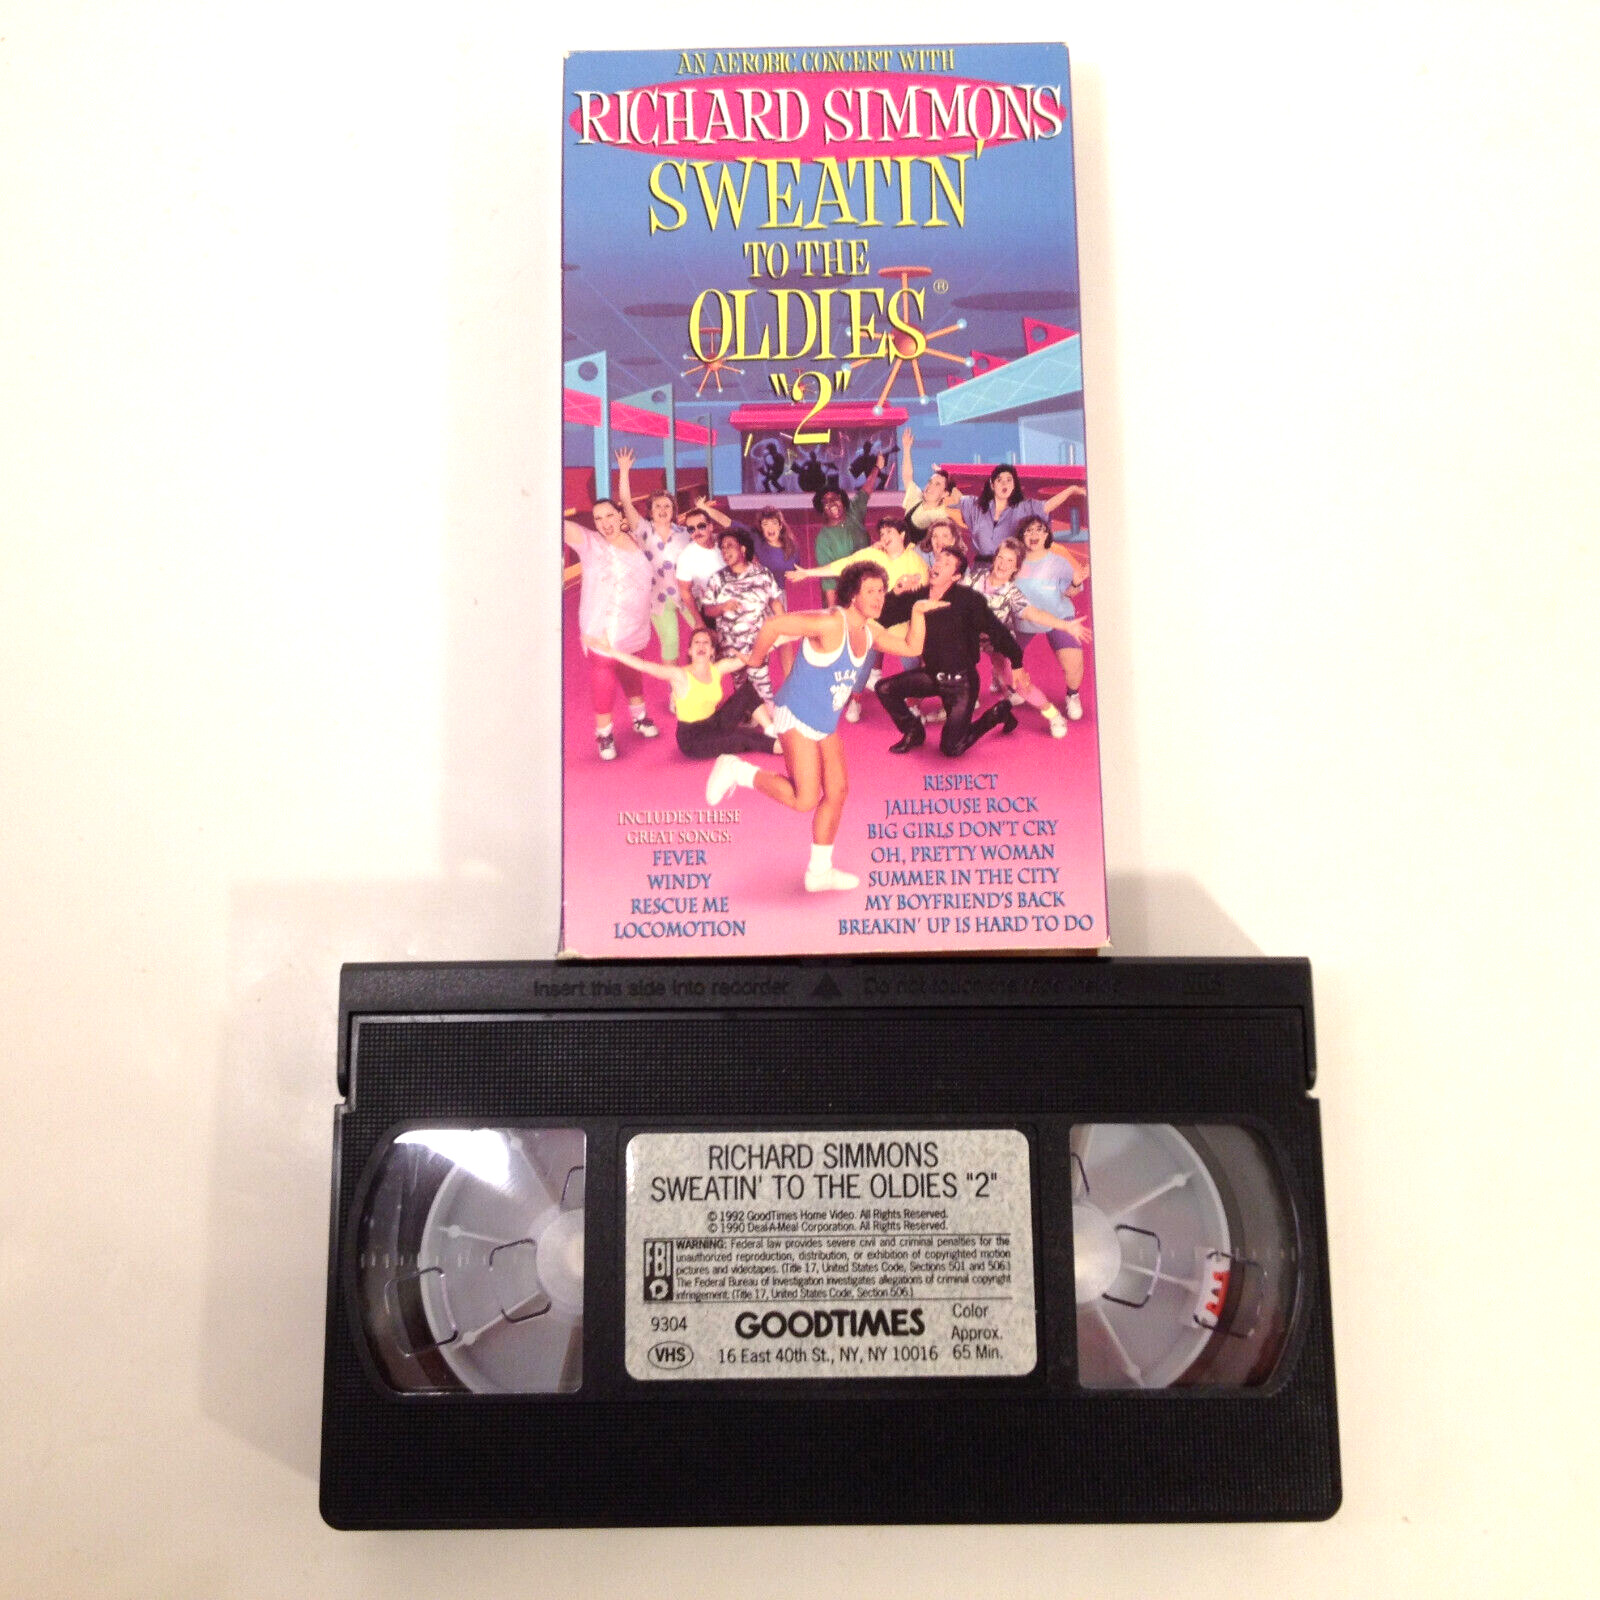 Vintage Richard Simmons SWEATIN TO THE OLDIES 2 Fun & Fitness Dance Aerobic VHS